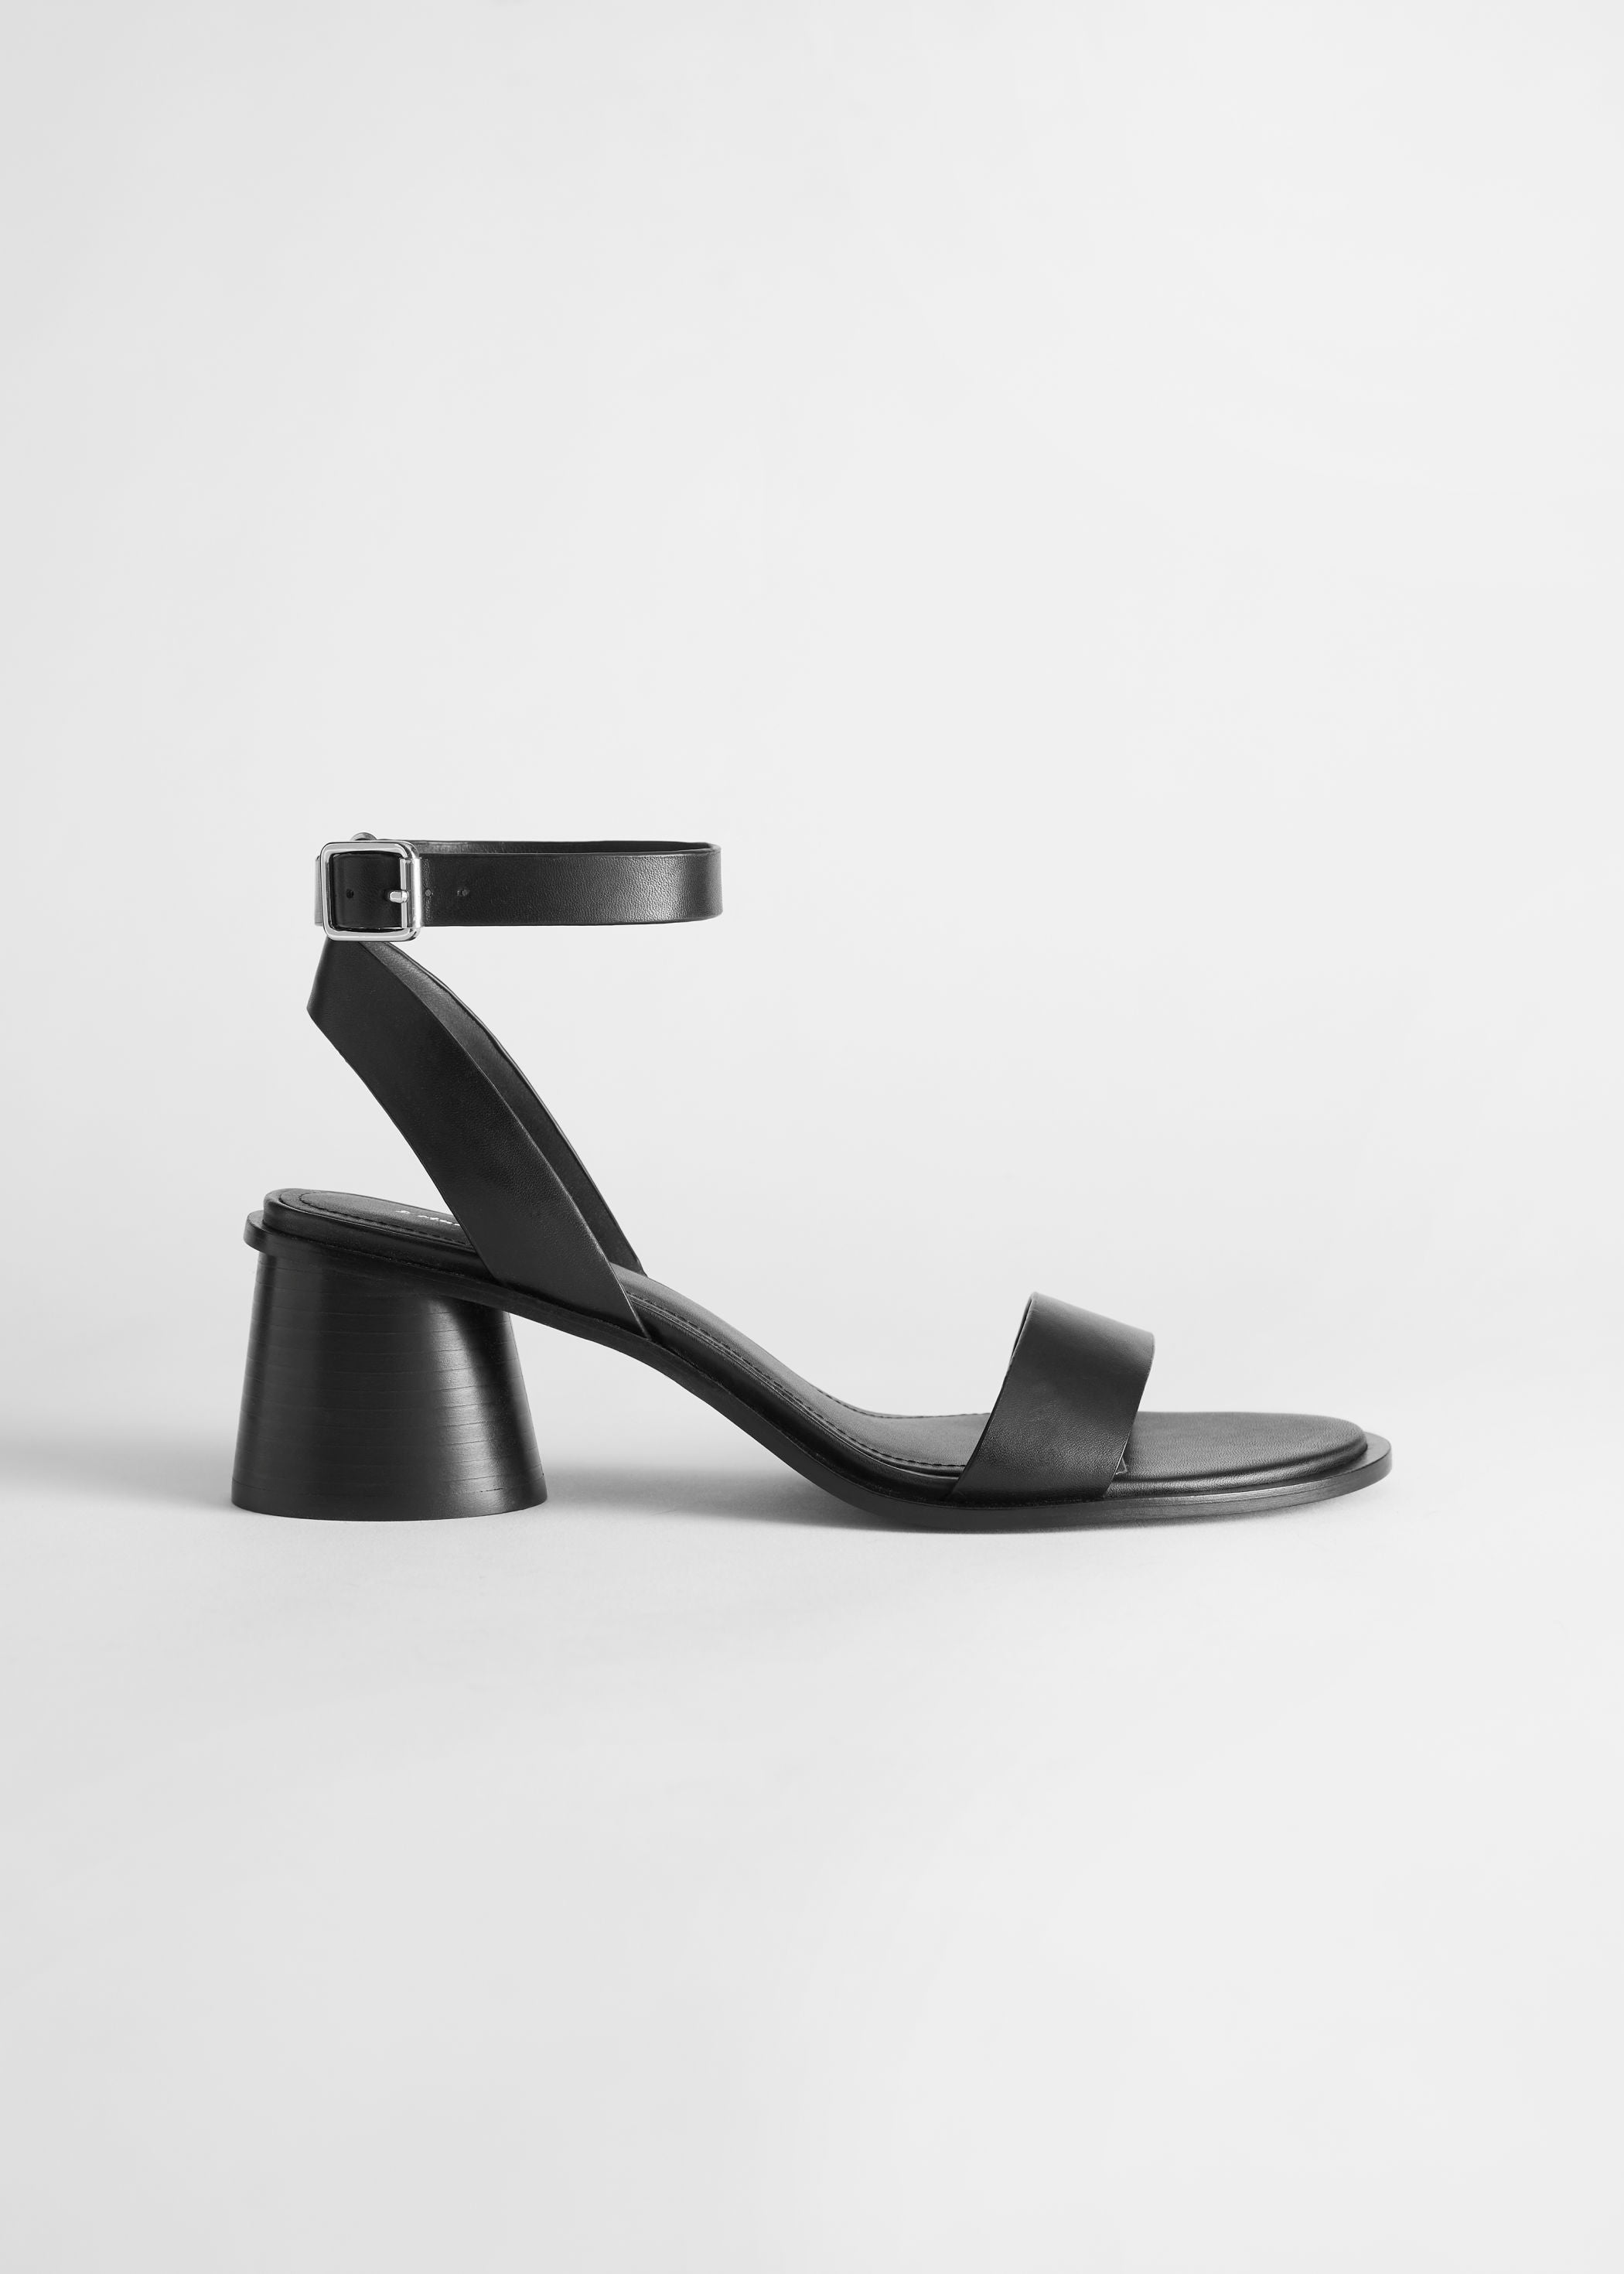 & Other Stories + Strappy Block Heel Leather Sandal